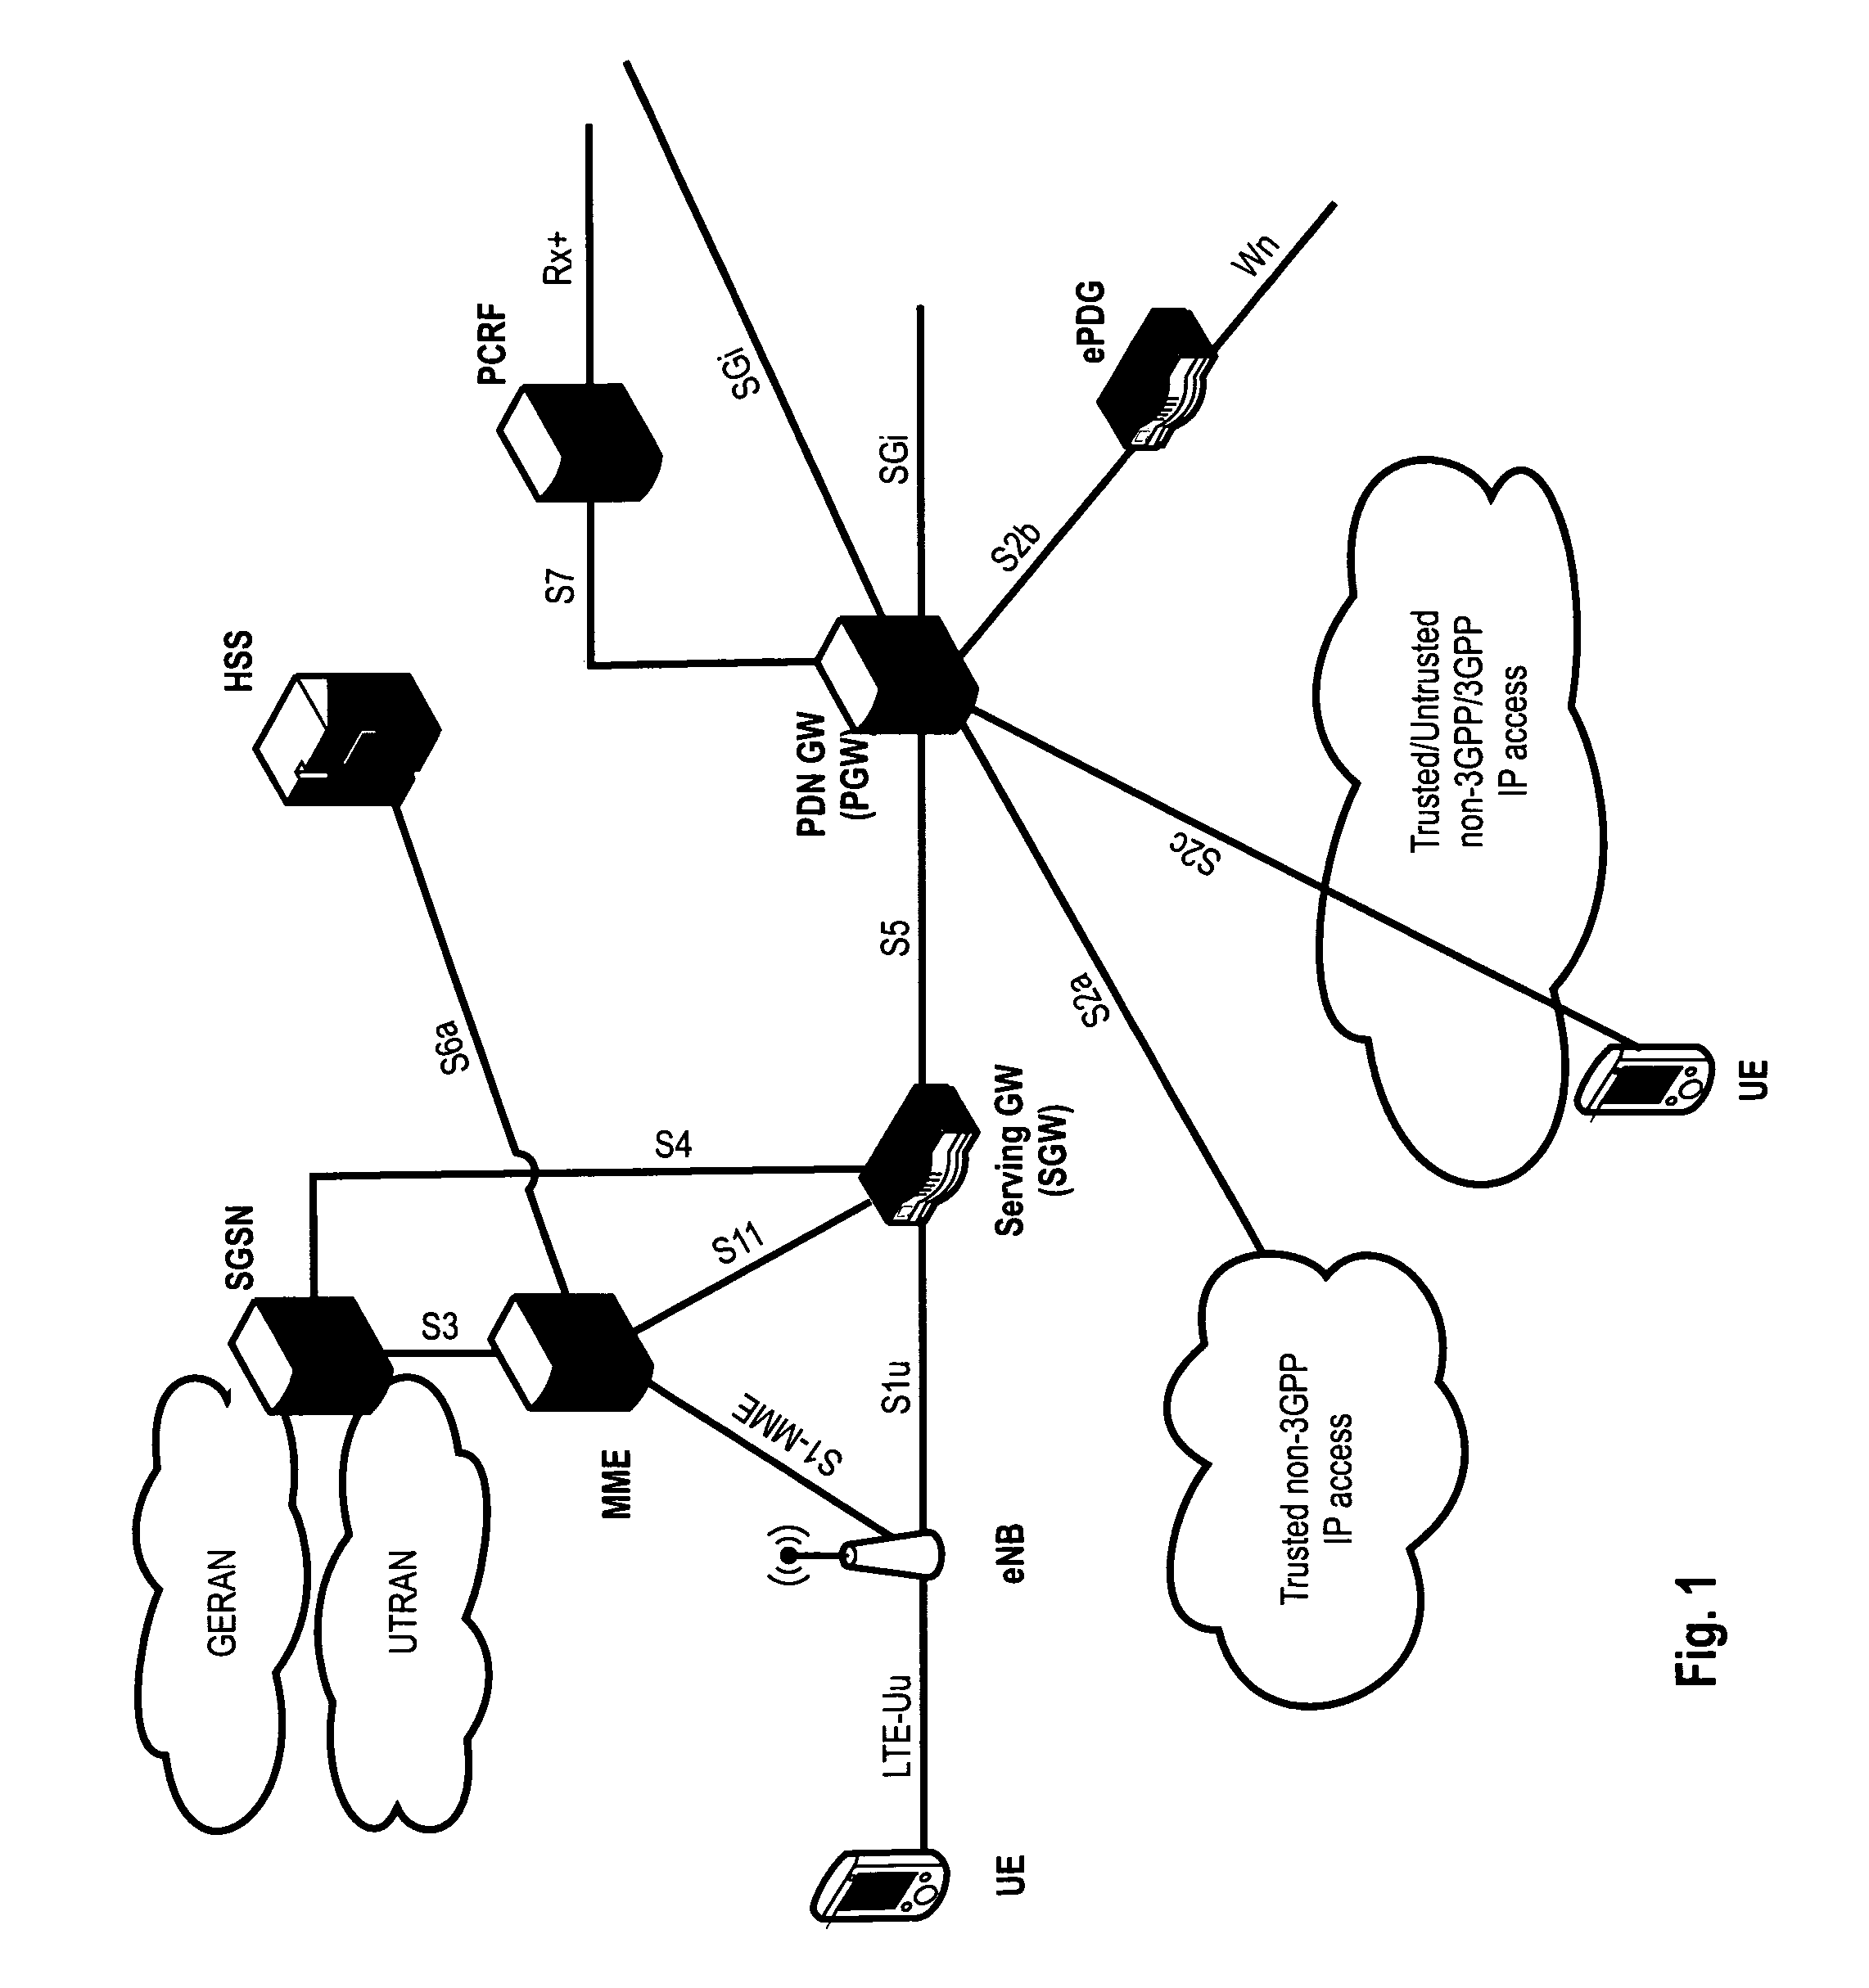 Transmit power control for physical random access channels